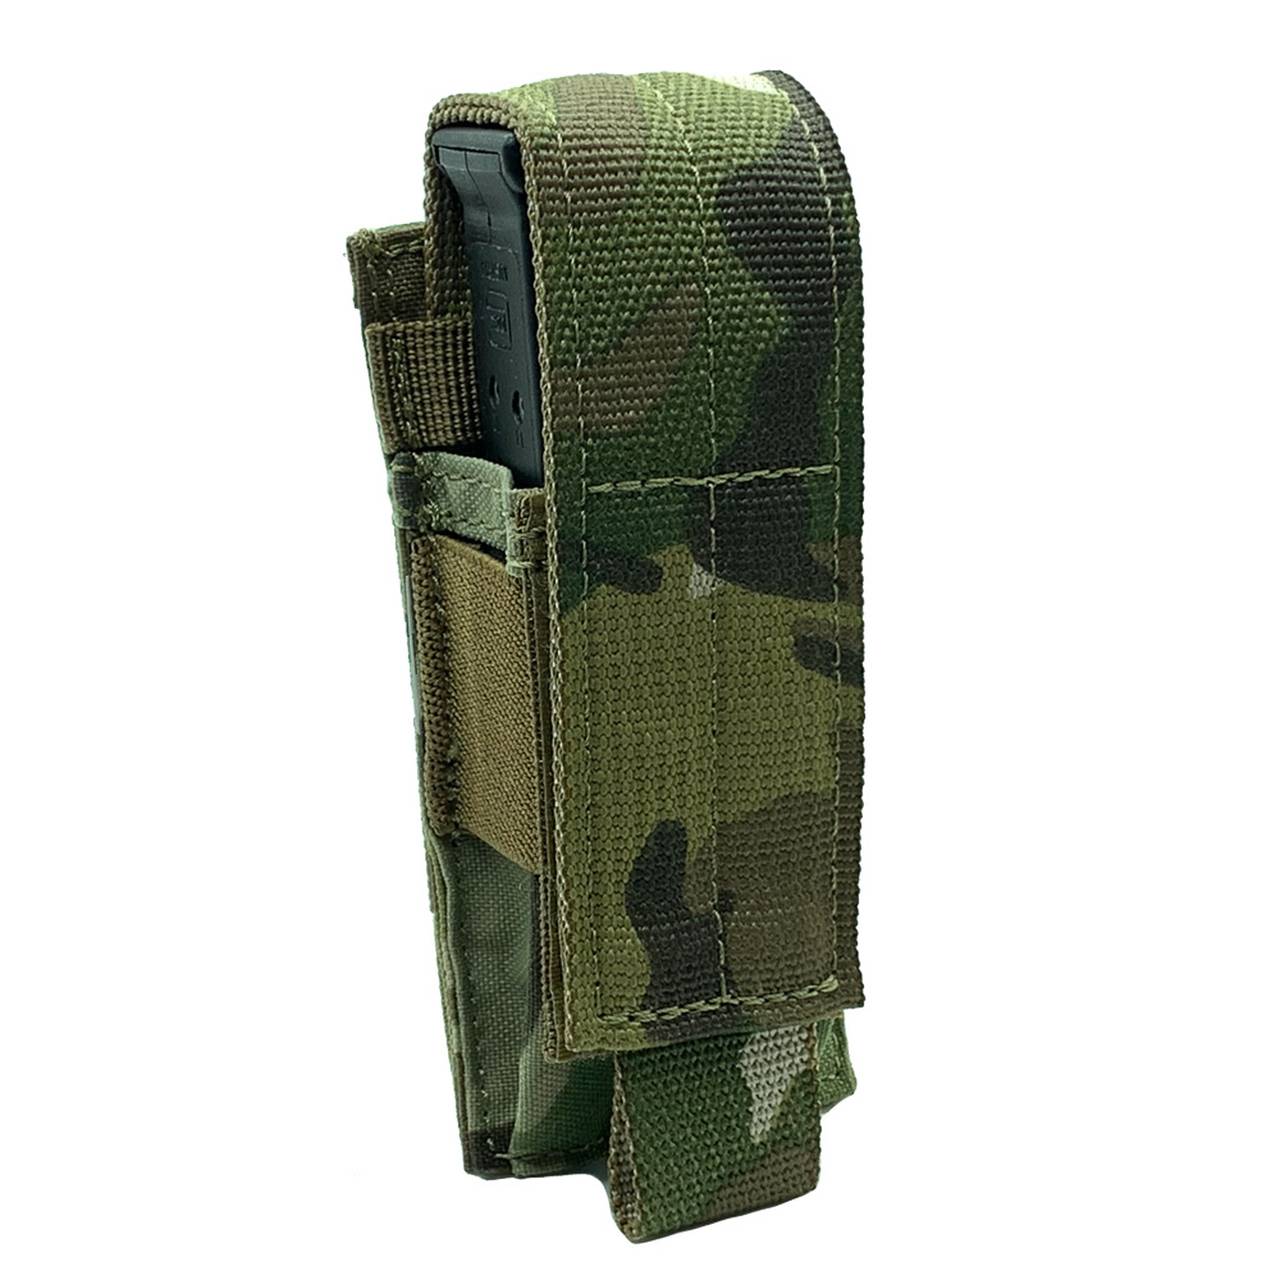 SHELLBACK TACTICAL THE SINGLE PISTOL MAG POUCH